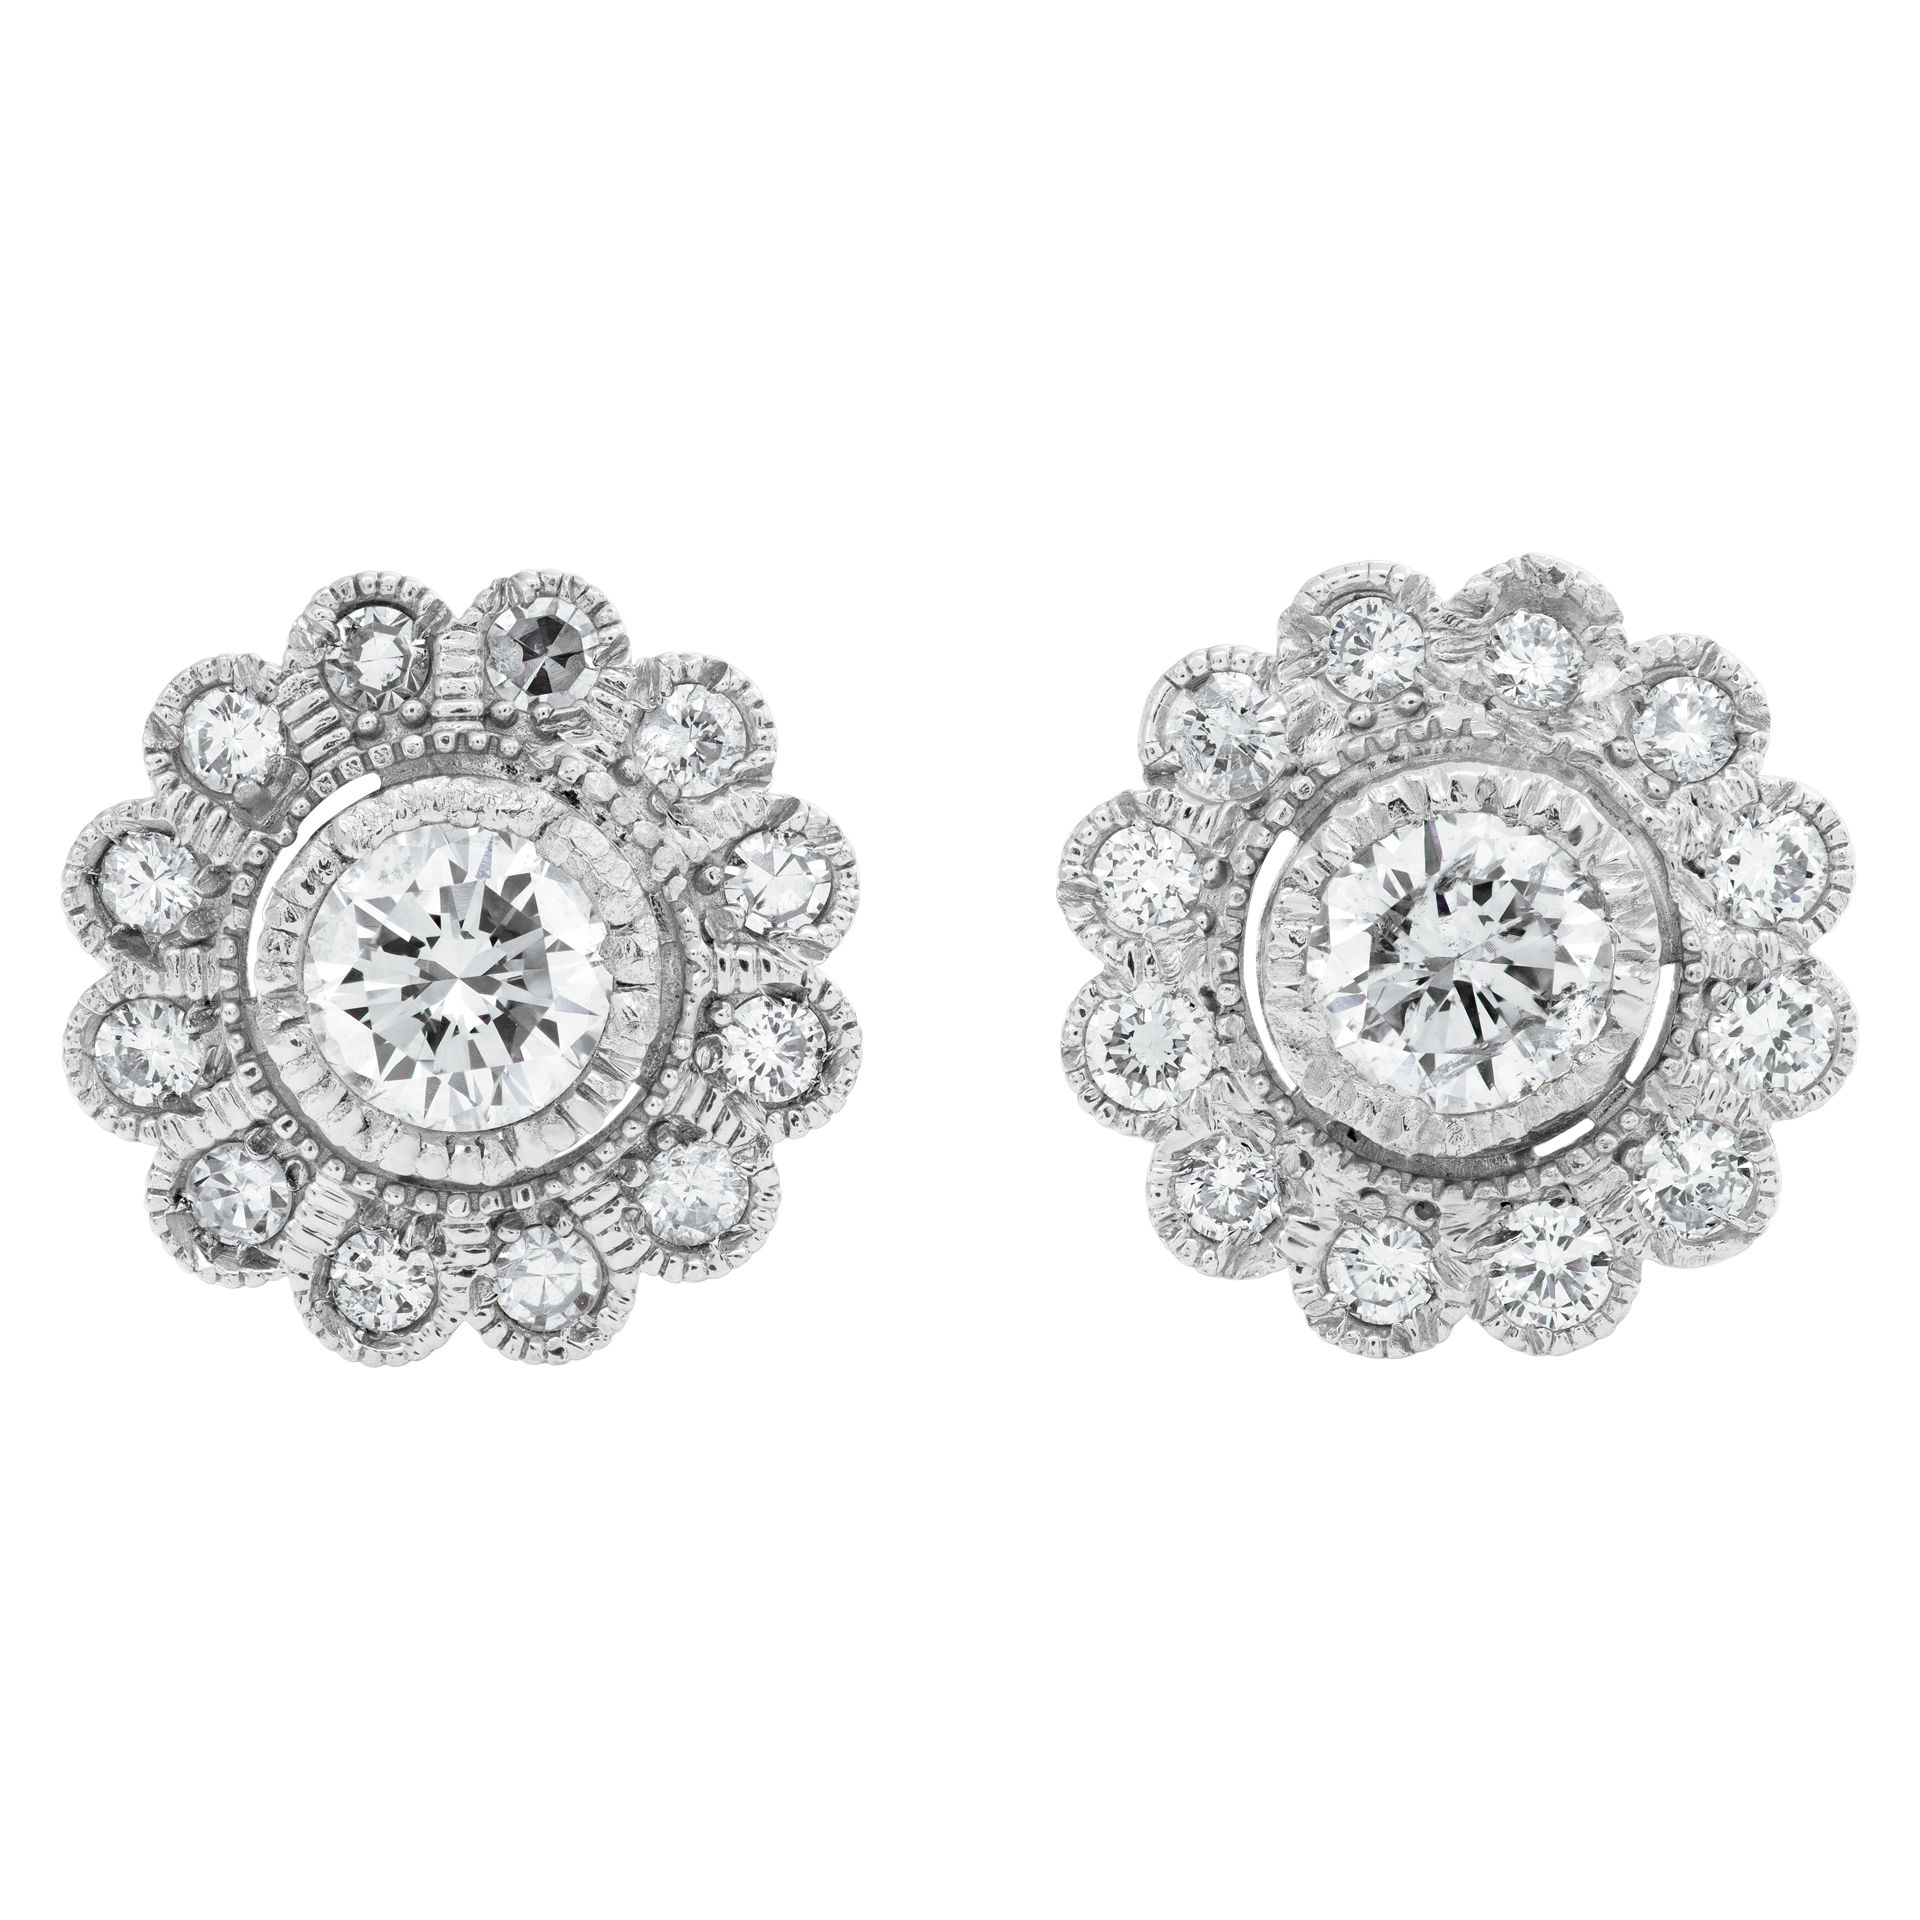 Flower Shaped Diamond Stud earrings full cut brilliant diamond total approx weight= 0.90 cts set in 18k white gold 10mm diameter image 1